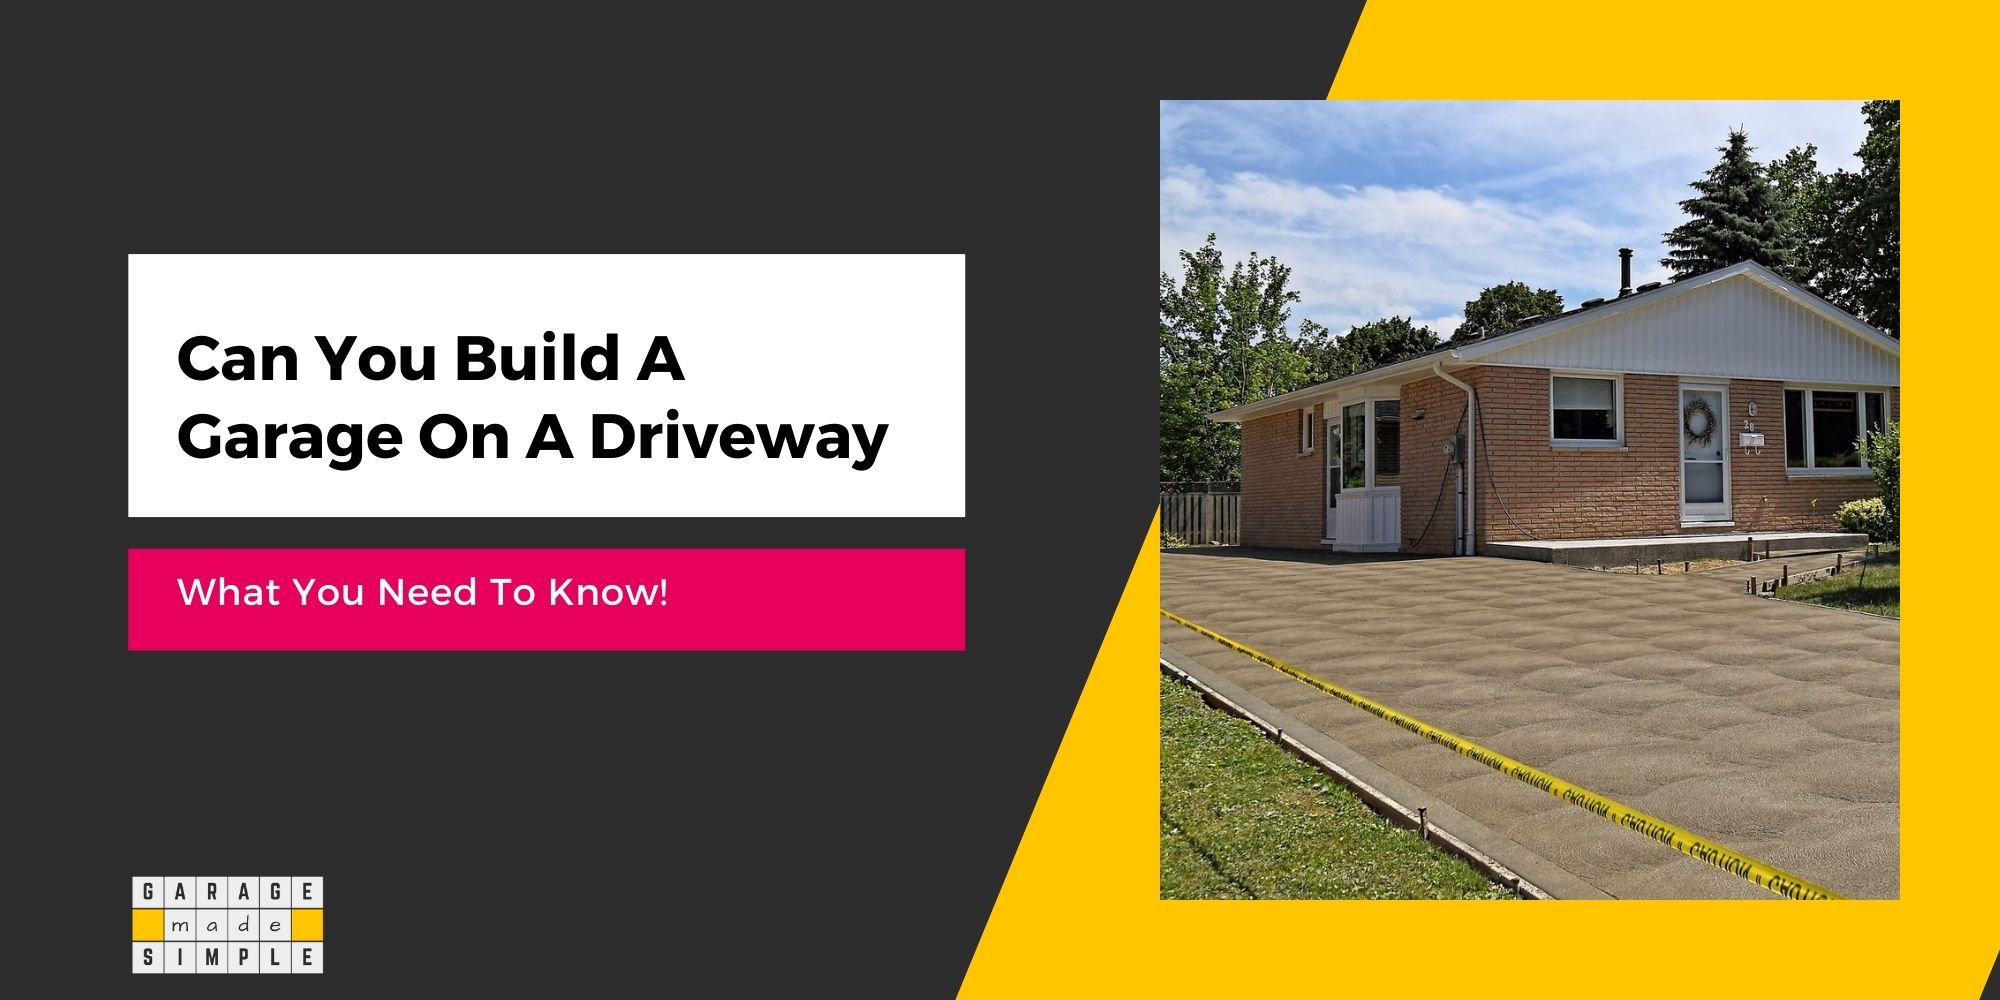 Building A Garage On Your Driveway Made Easy